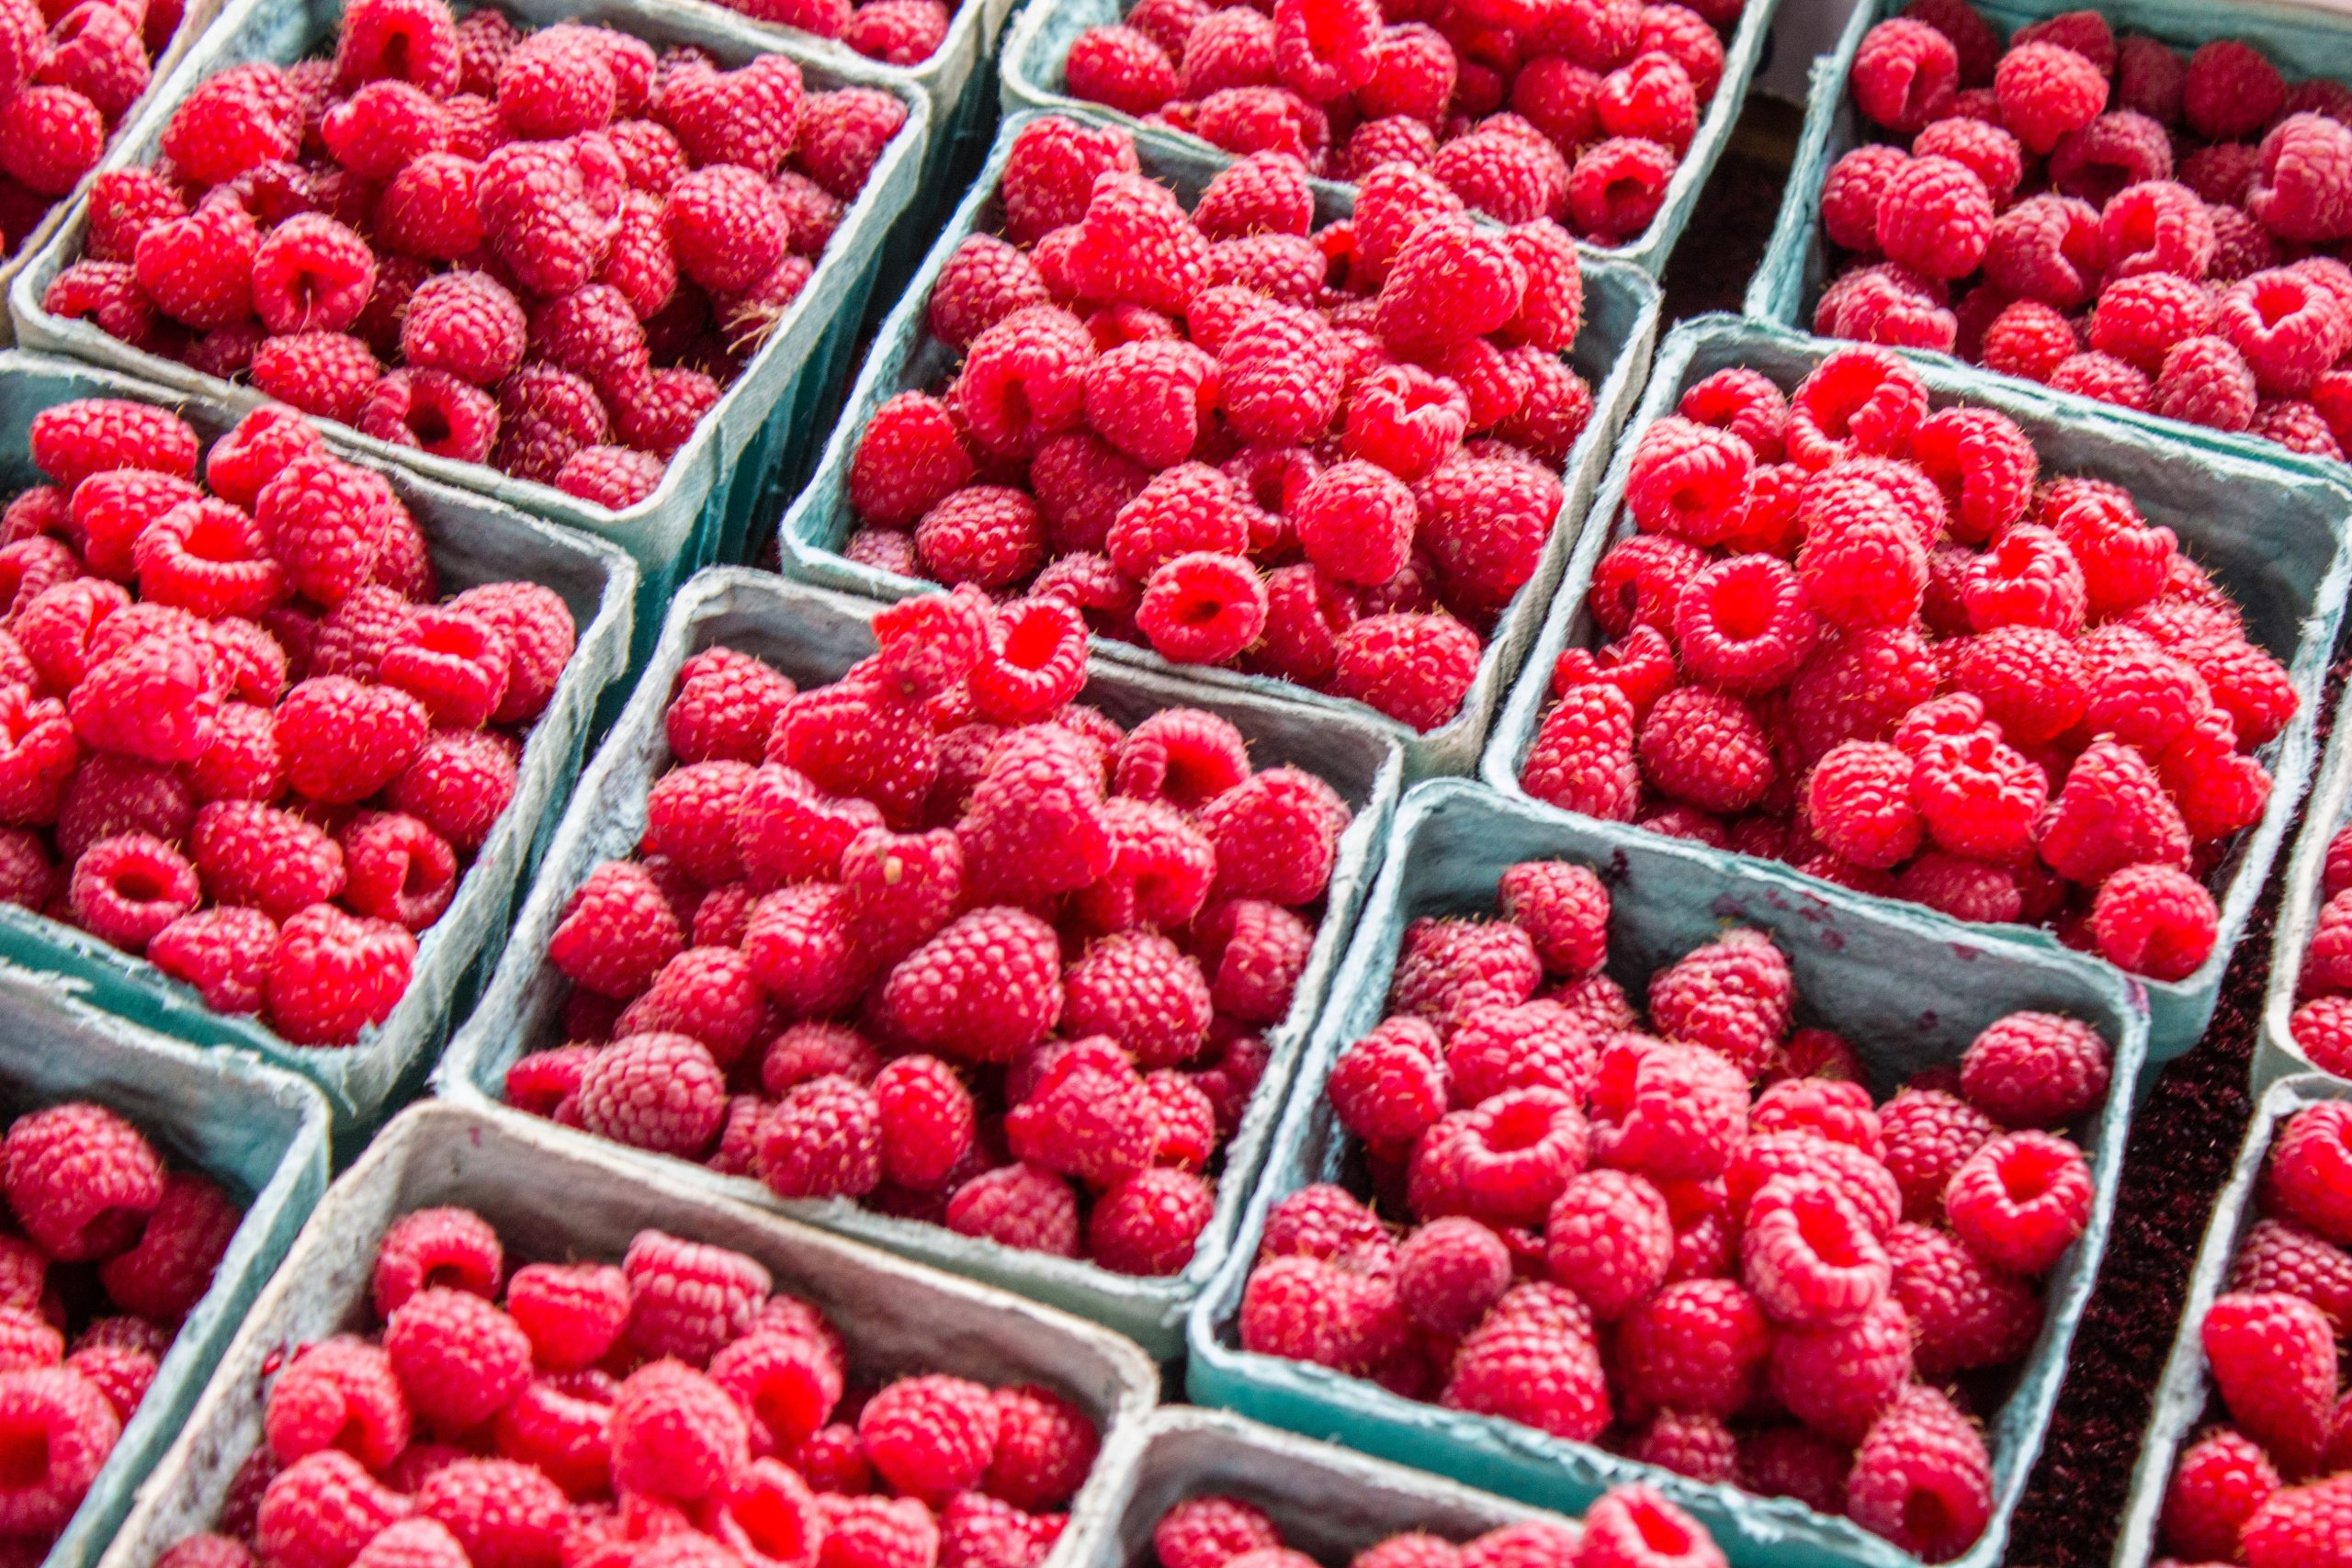 Picture of small cartons of fresh raspberries.